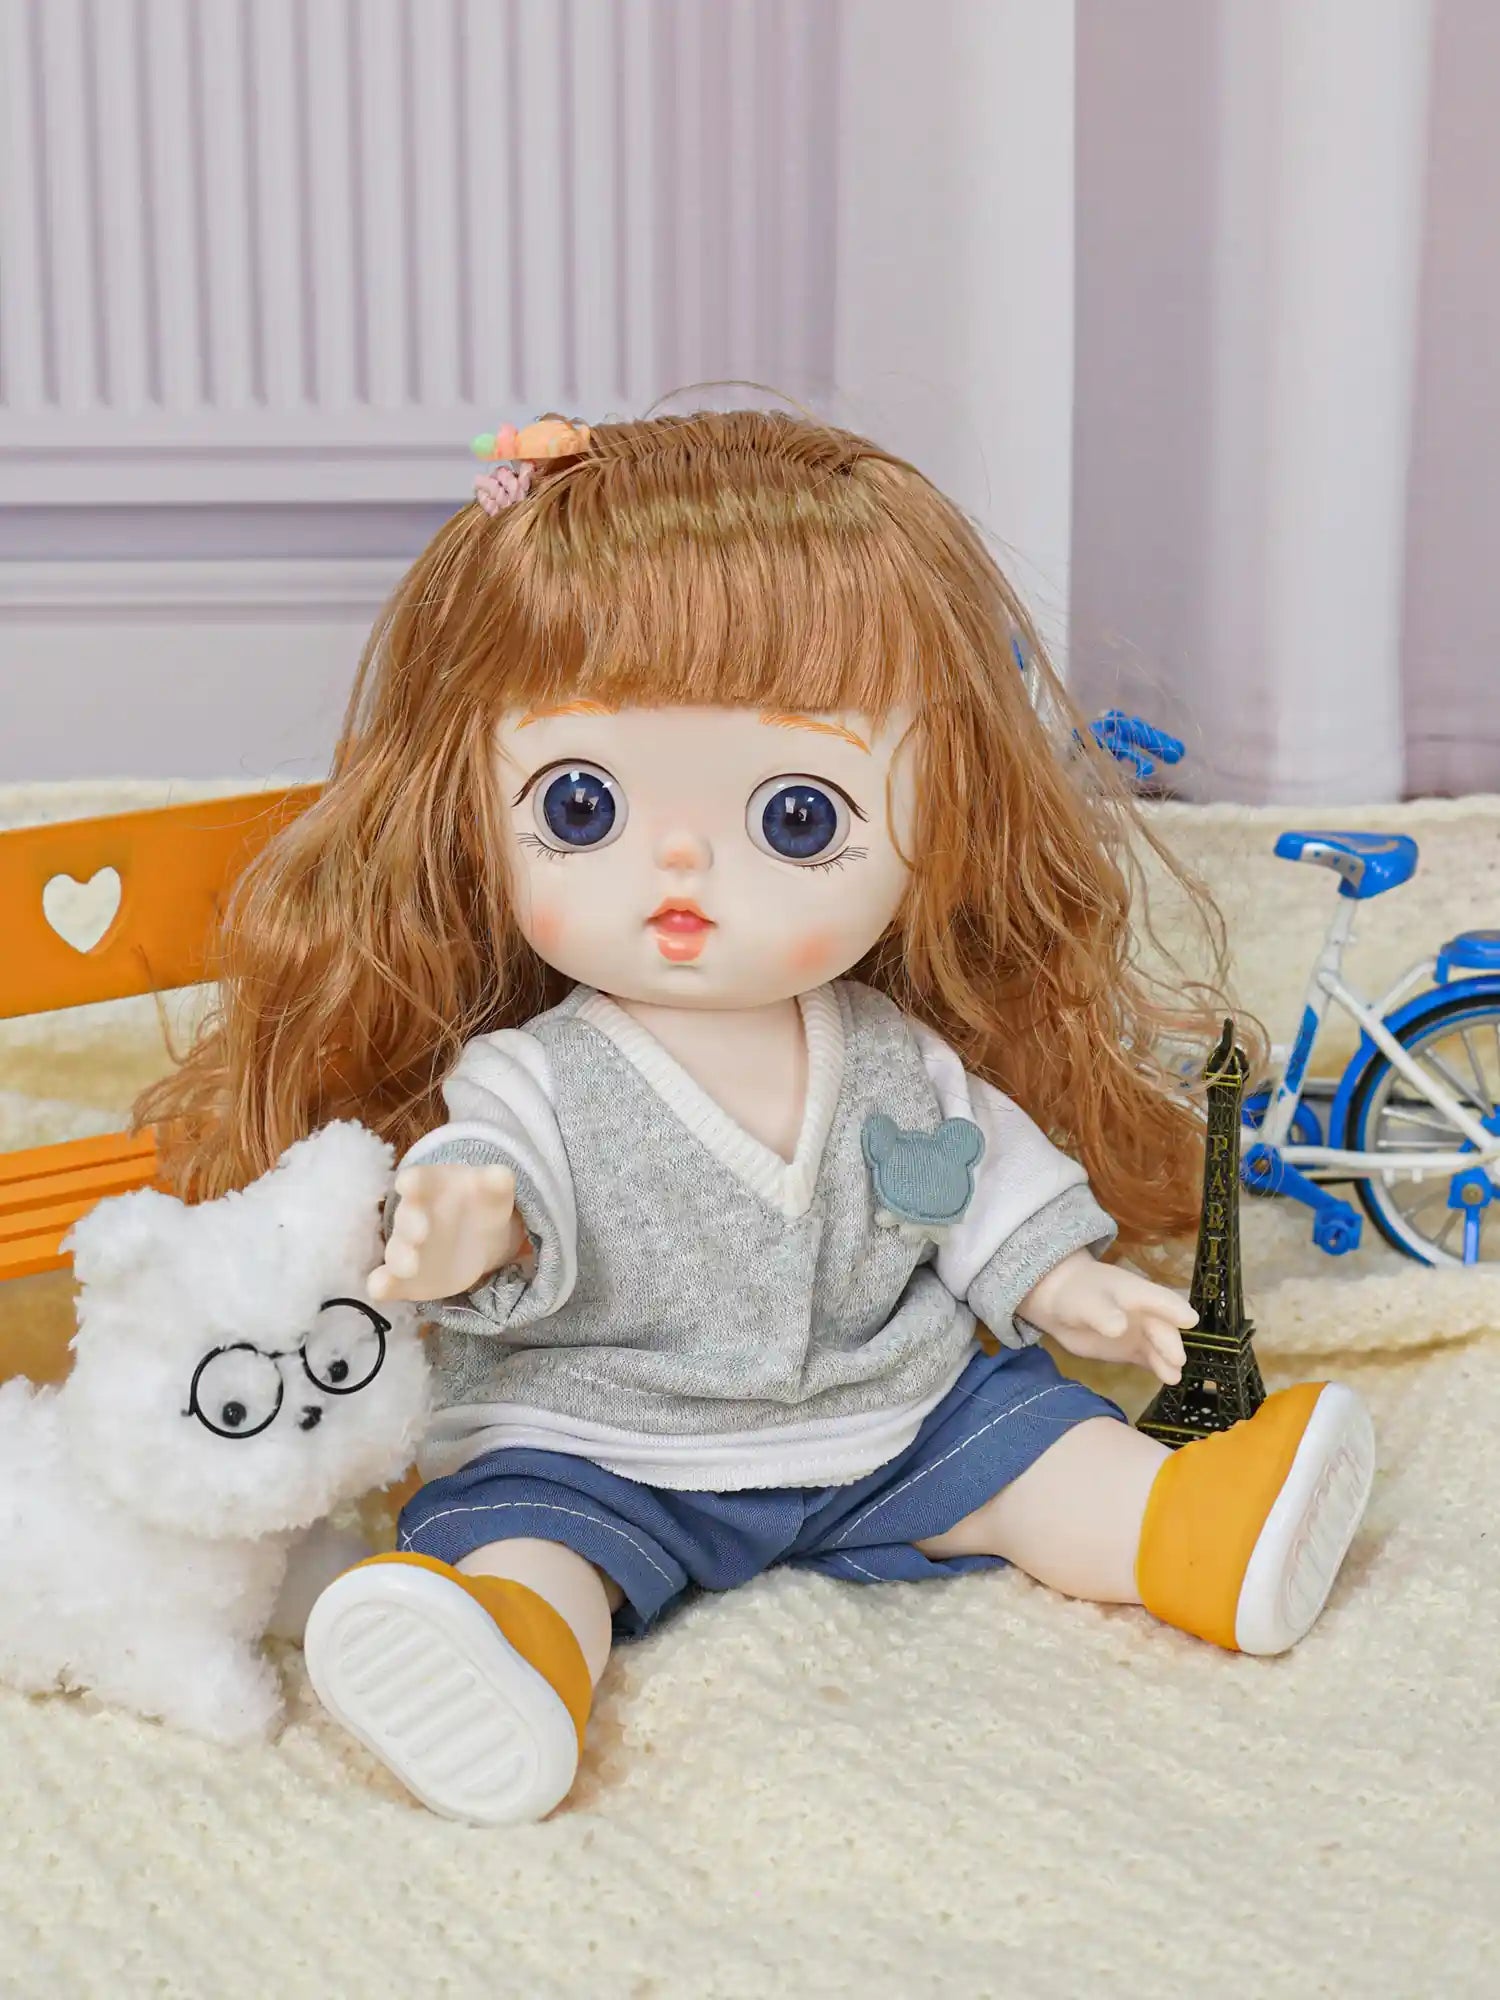 Childlike toy figure with large eyes and stylish outfit, holding hands with a white, bespectacled plush dog.